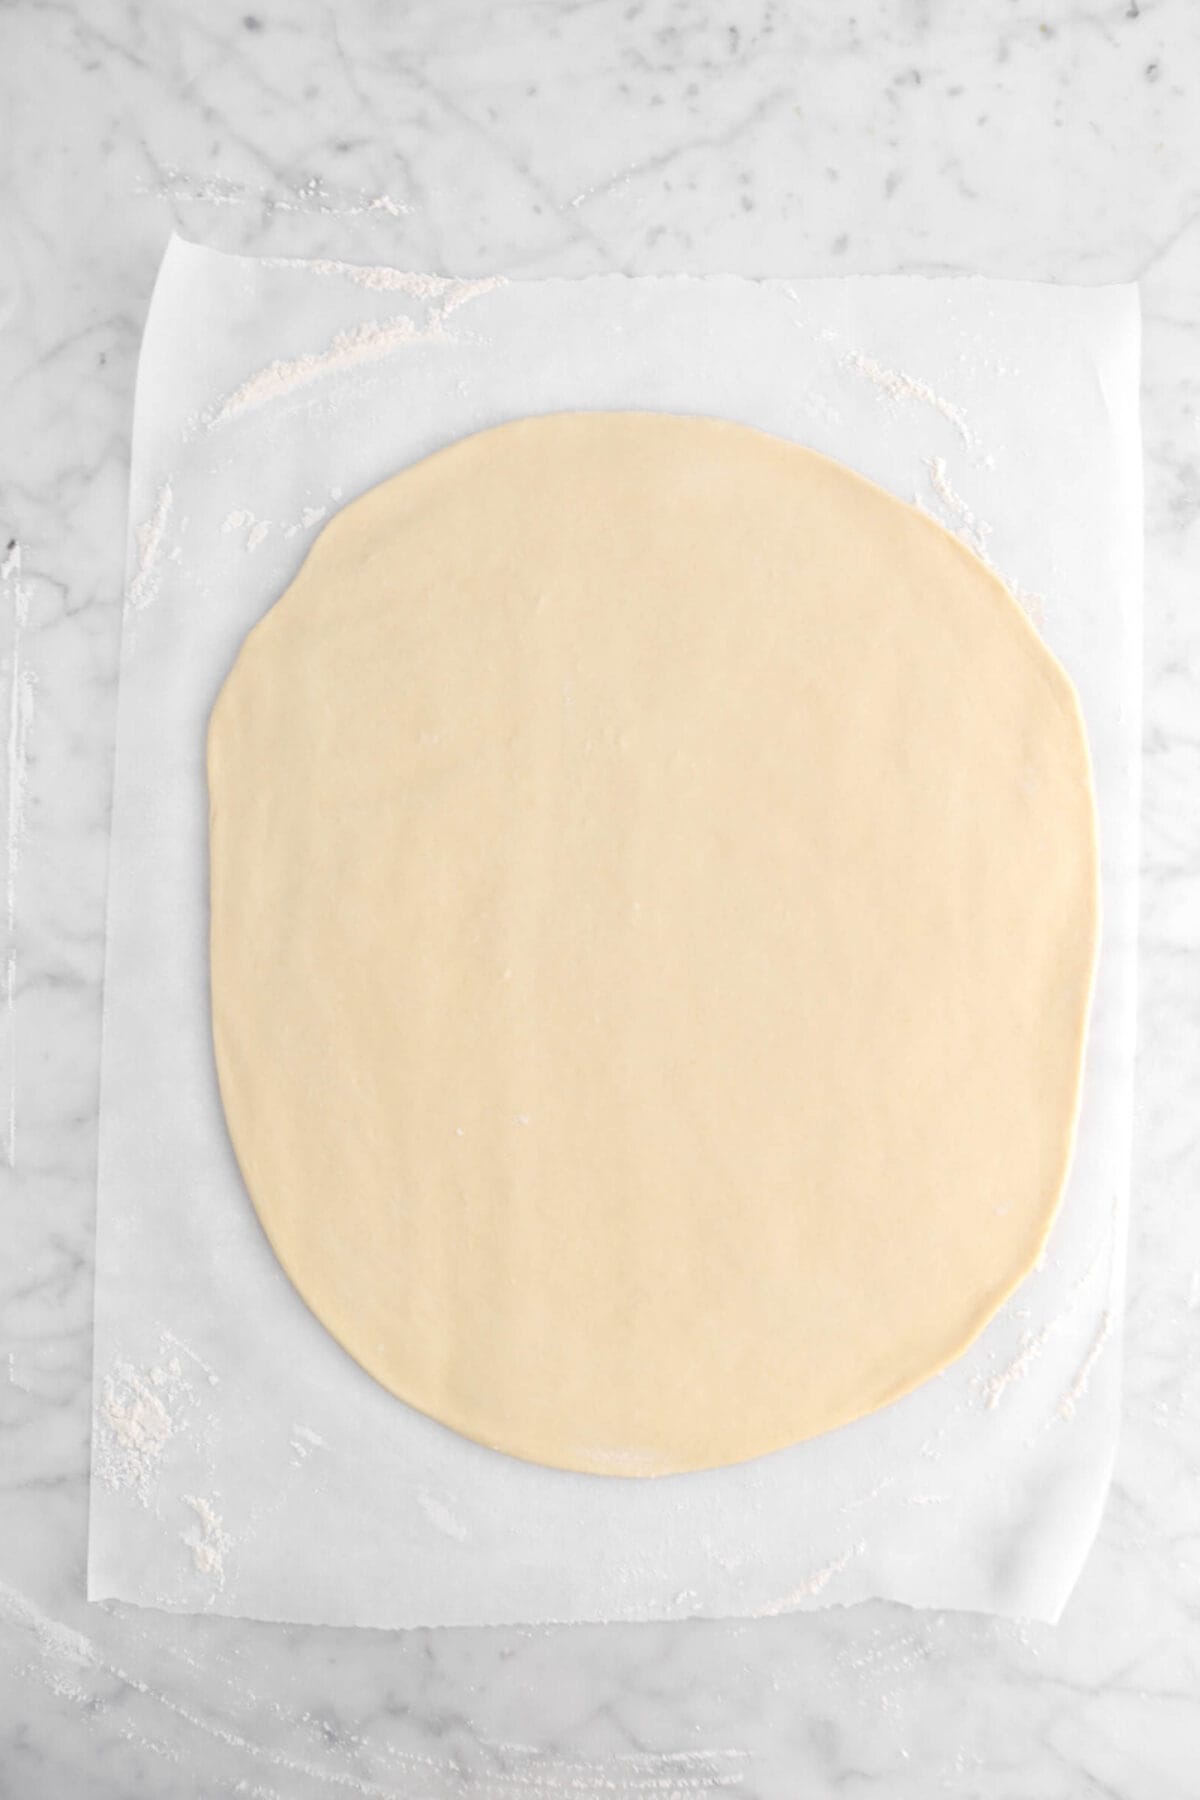 rolled dough on parchment paper